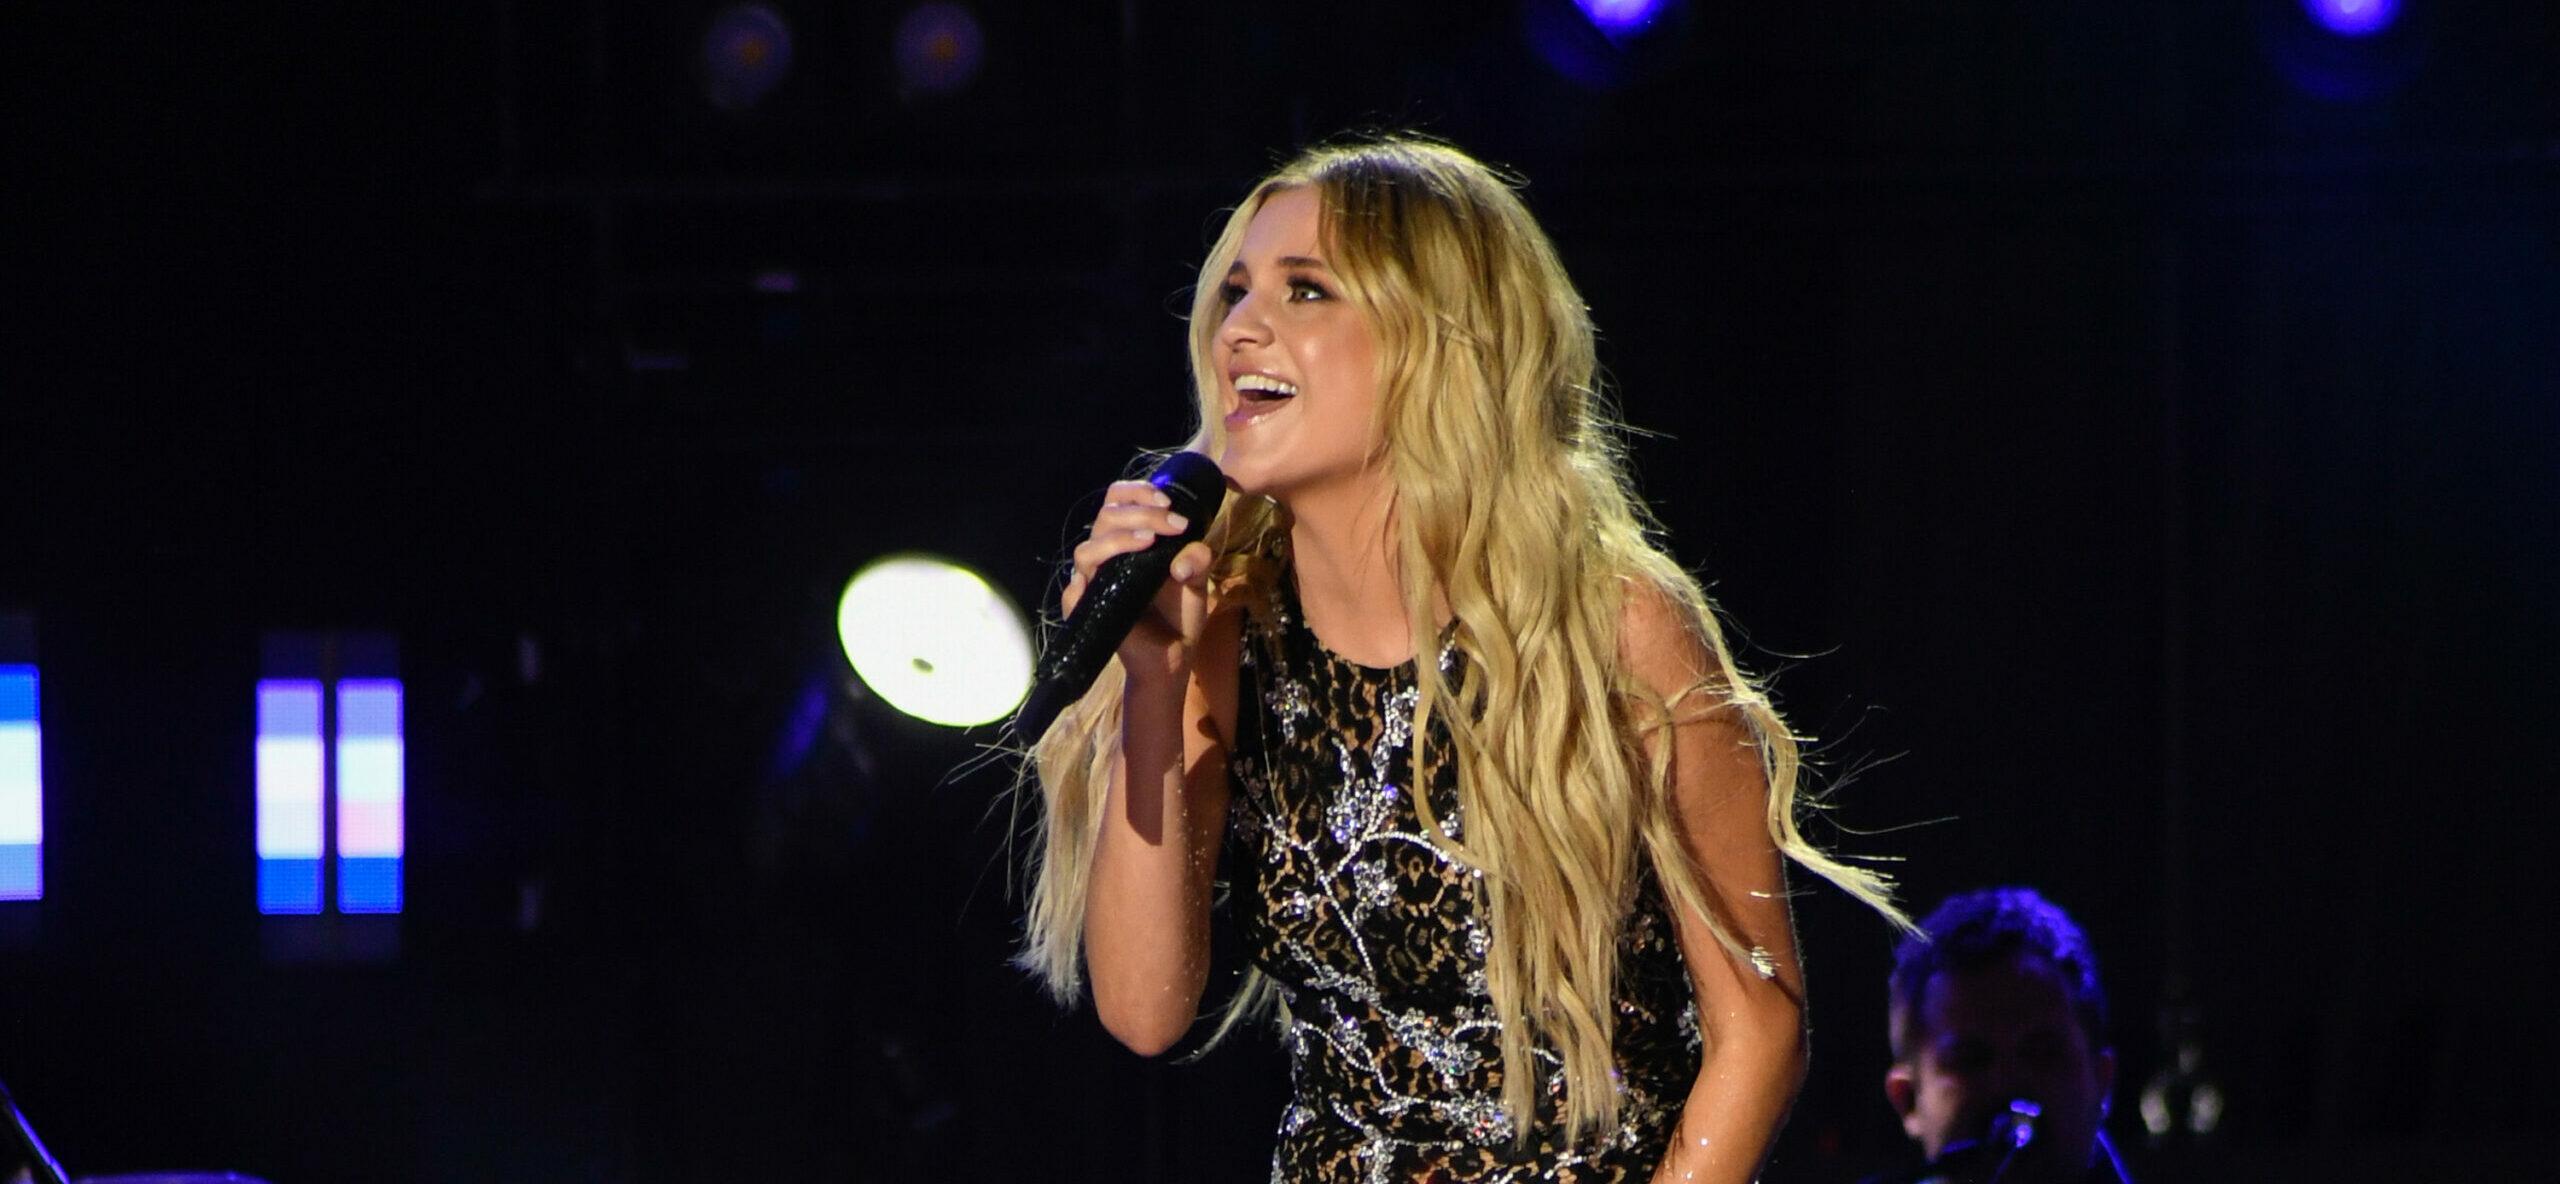 Kelsea Ballerini Opens Up In New Post, Thanks Fans For Support